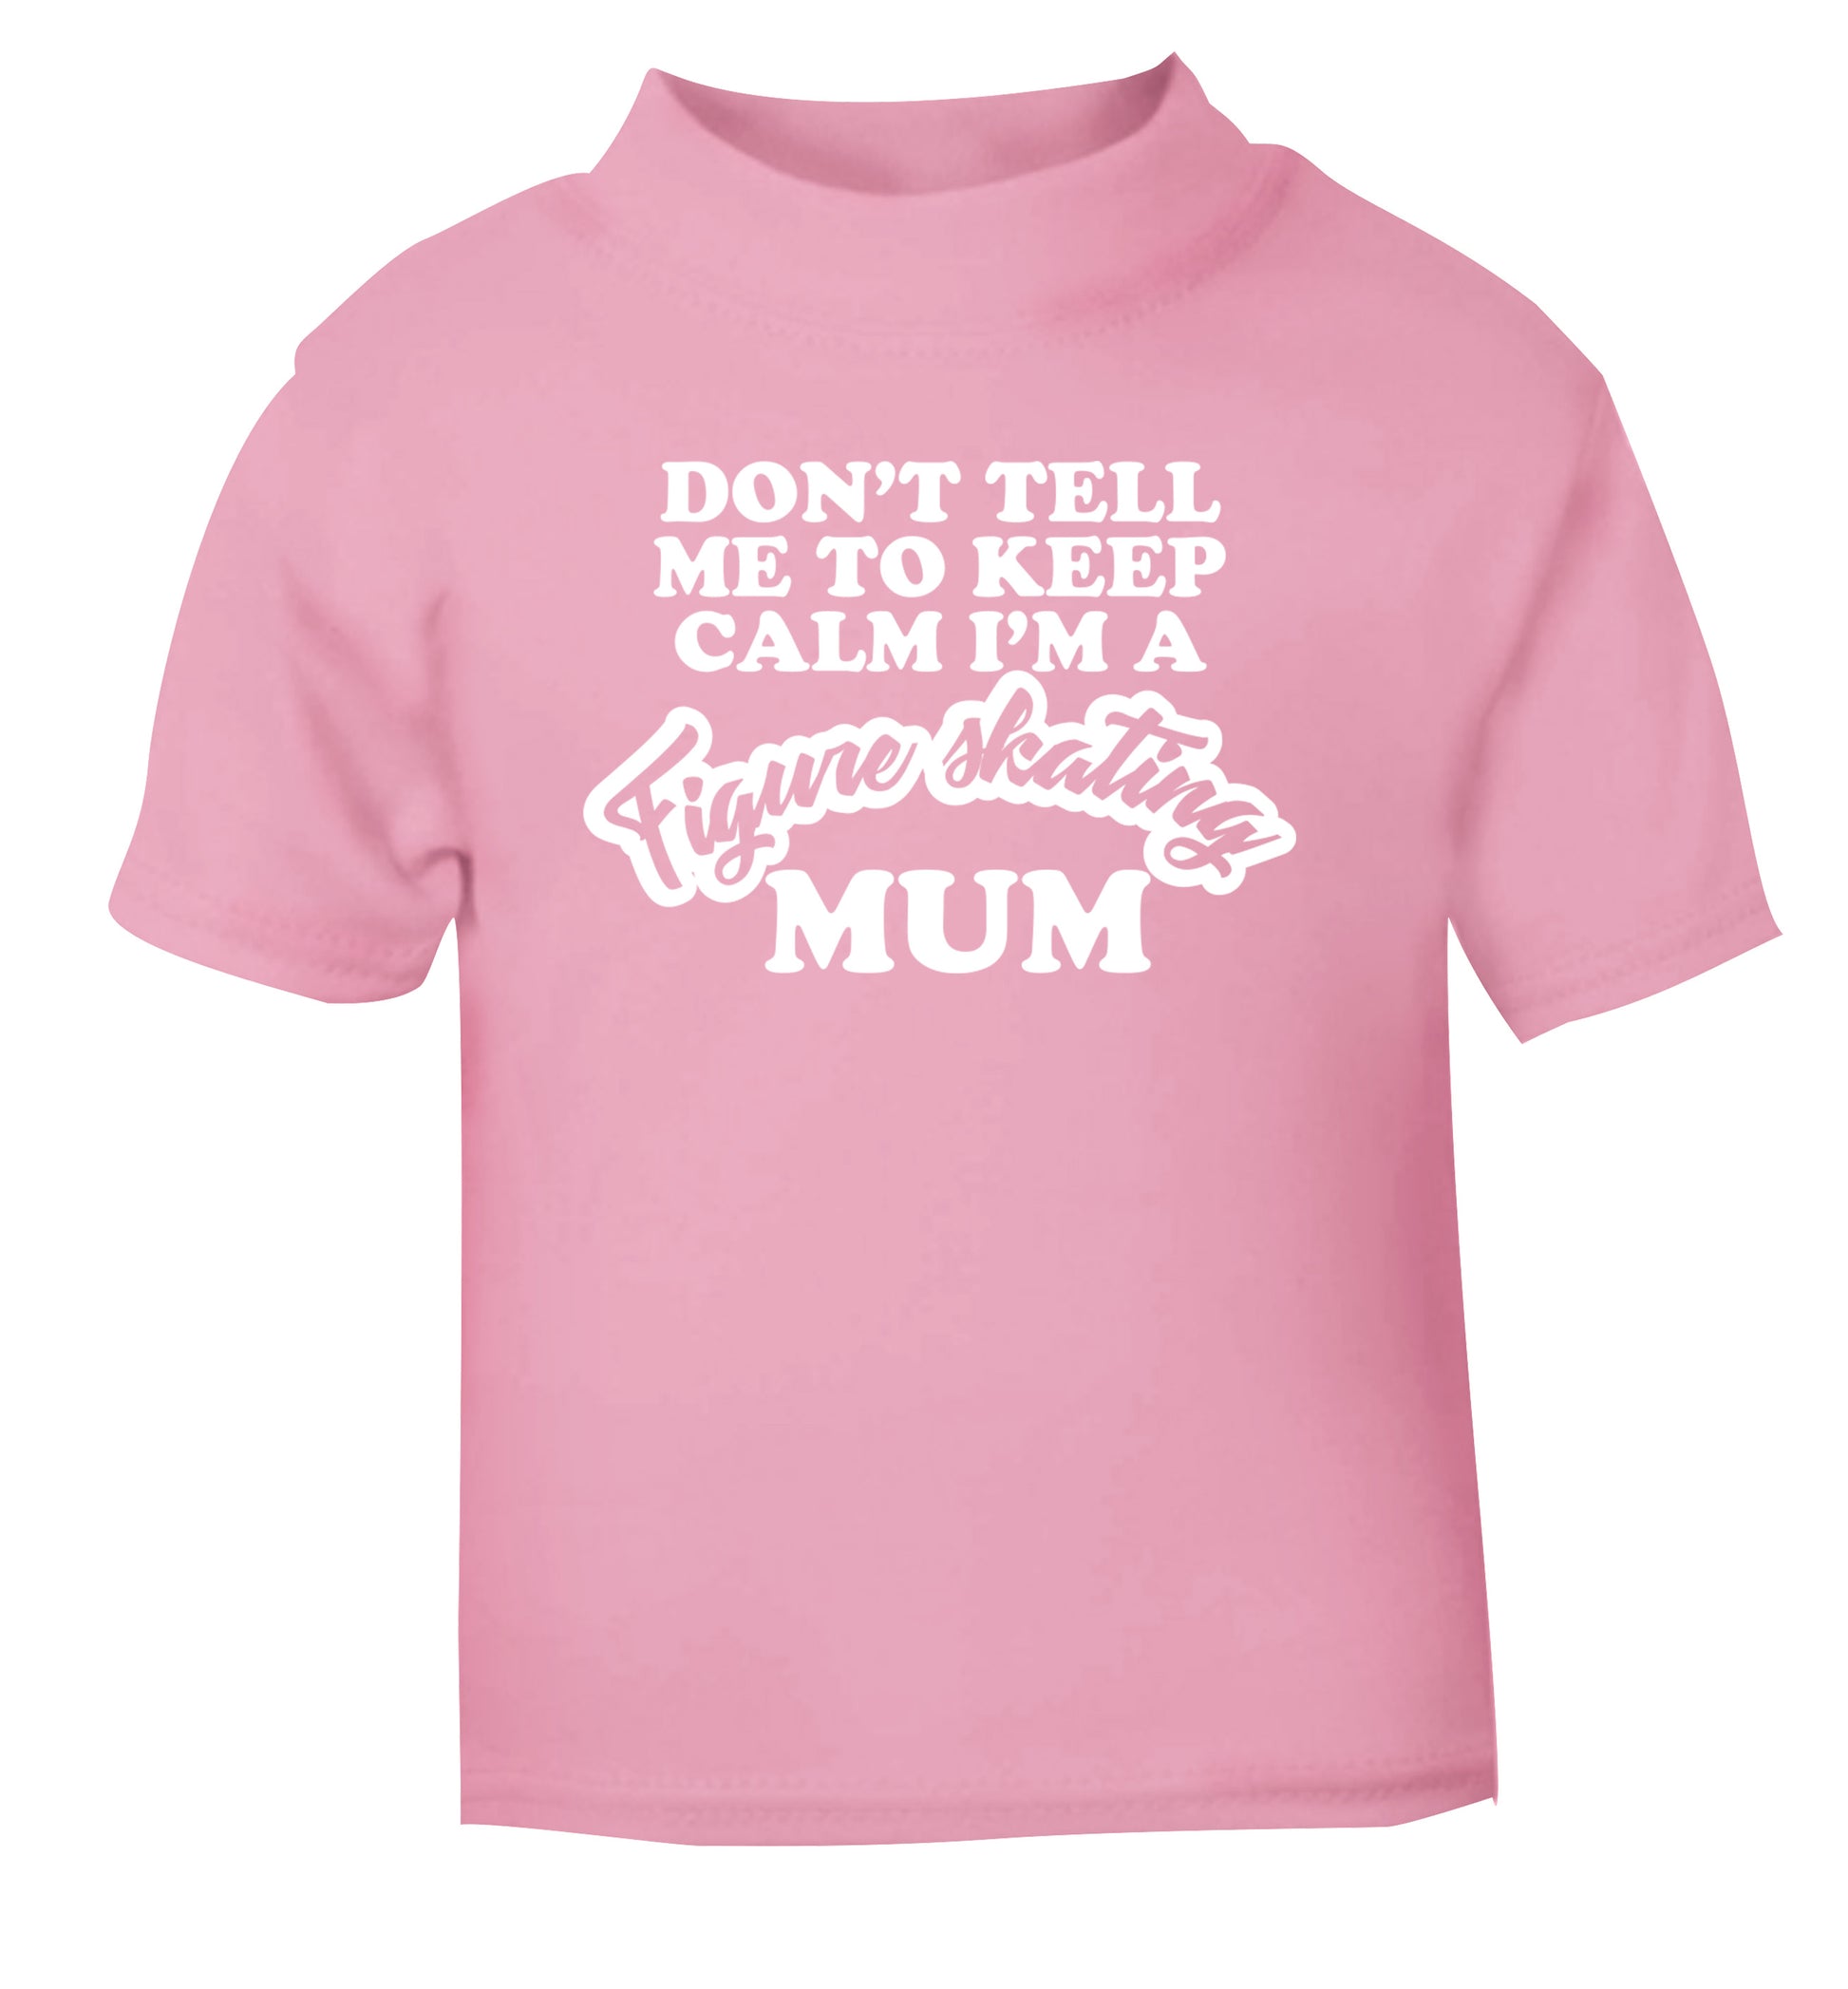 Don't tell me to keep calm I'm a figure skating mum light pink Baby Toddler Tshirt 2 Years